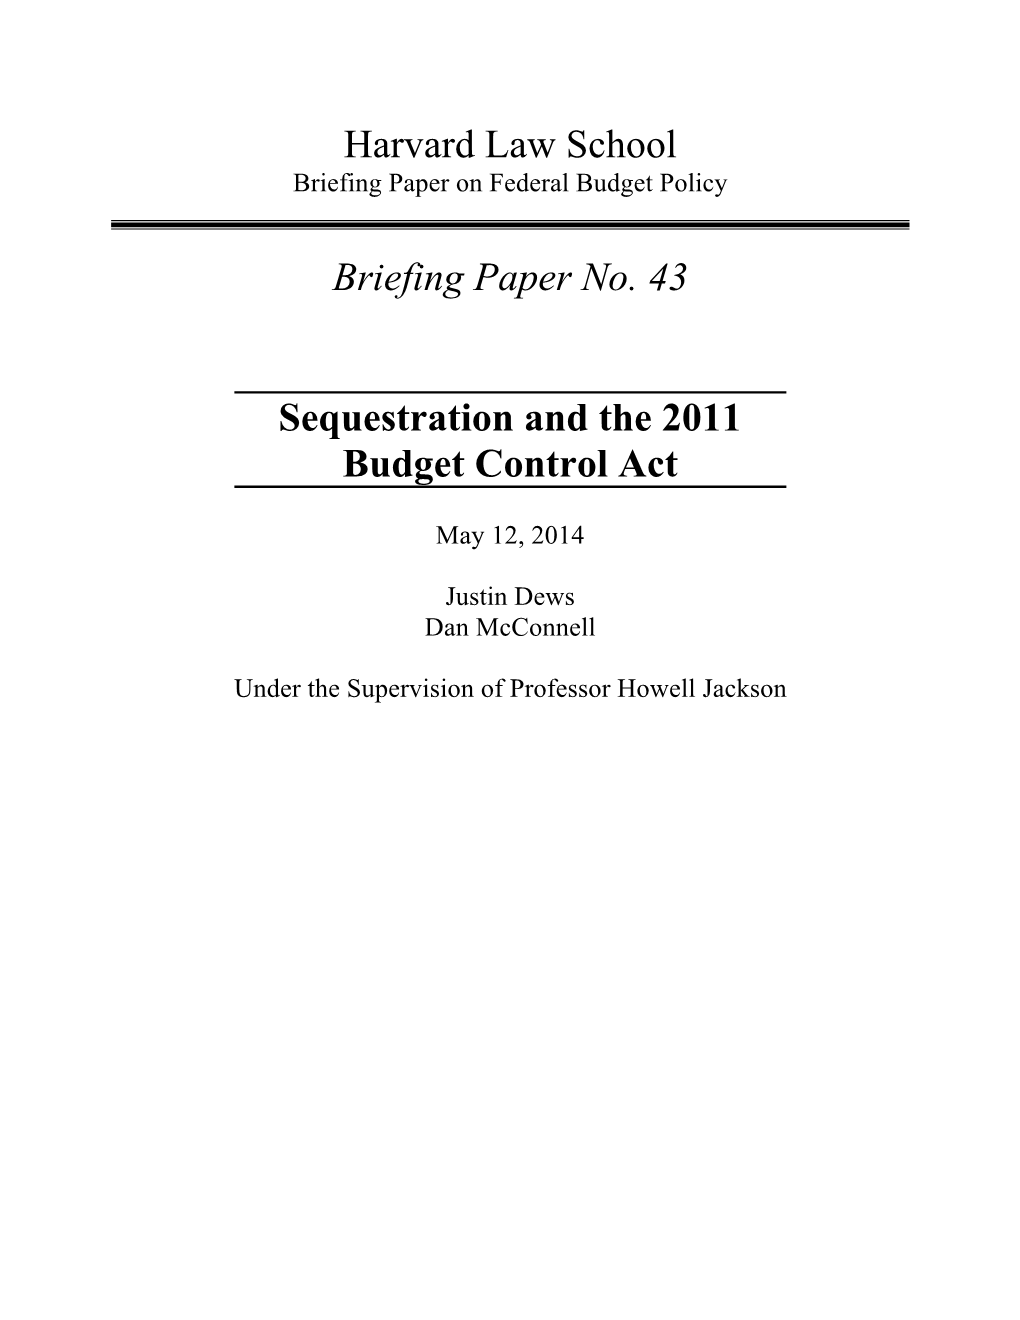 Justin Dews Sequestration and the Budget Control Act of 2011 Revised